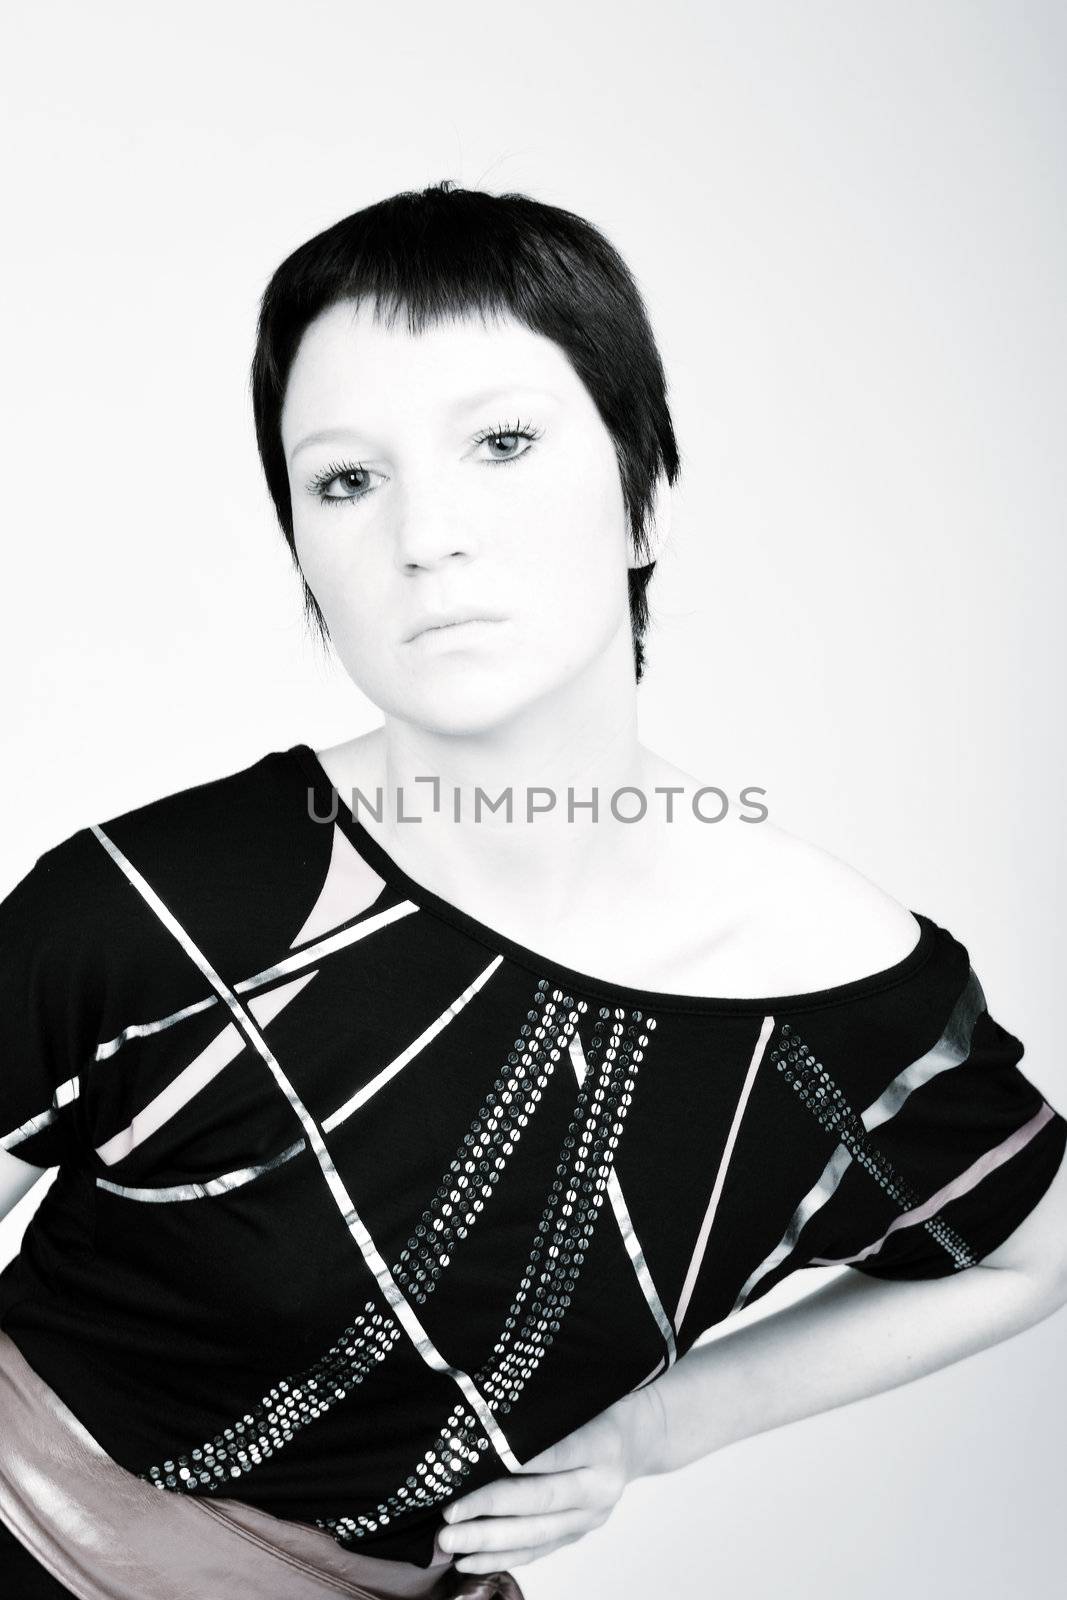 Studio portrait of a young woman with short hair in a fashion po by DNFStyle